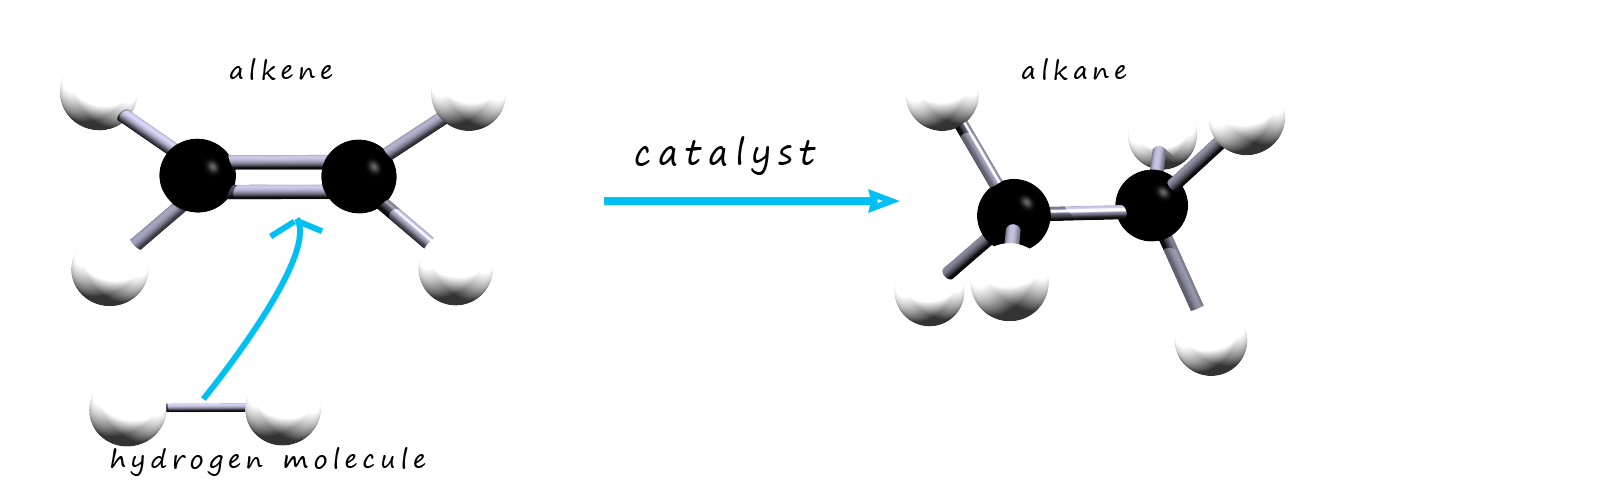 3d model to show how an alkene is hydrogenated.